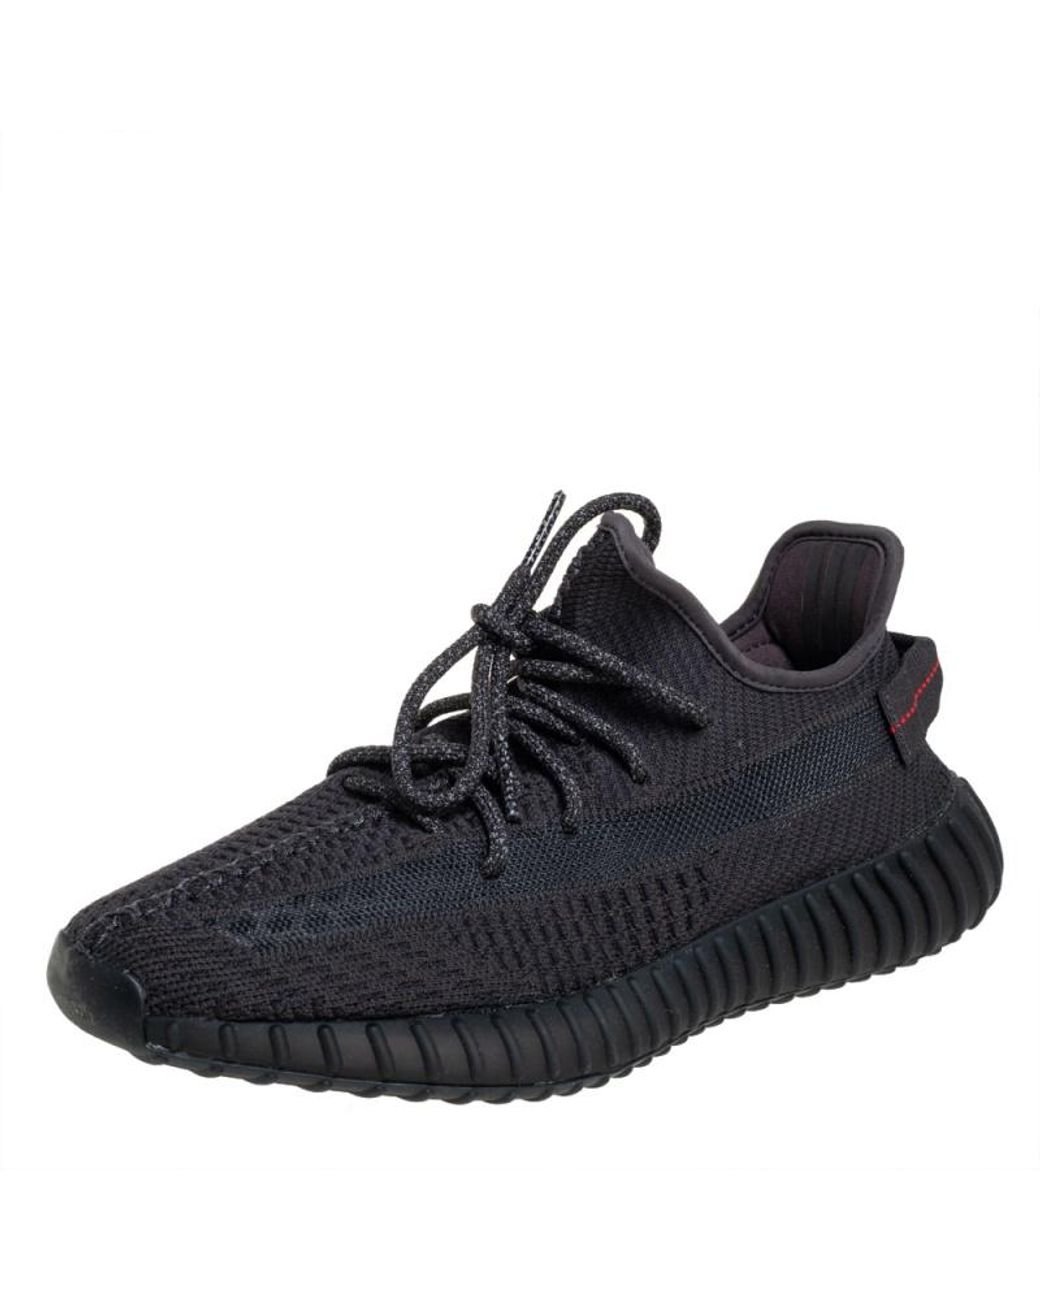 Yeezy Black Knit Fabric Boost 350 V2 Low Top Sneakers for Men - Lyst